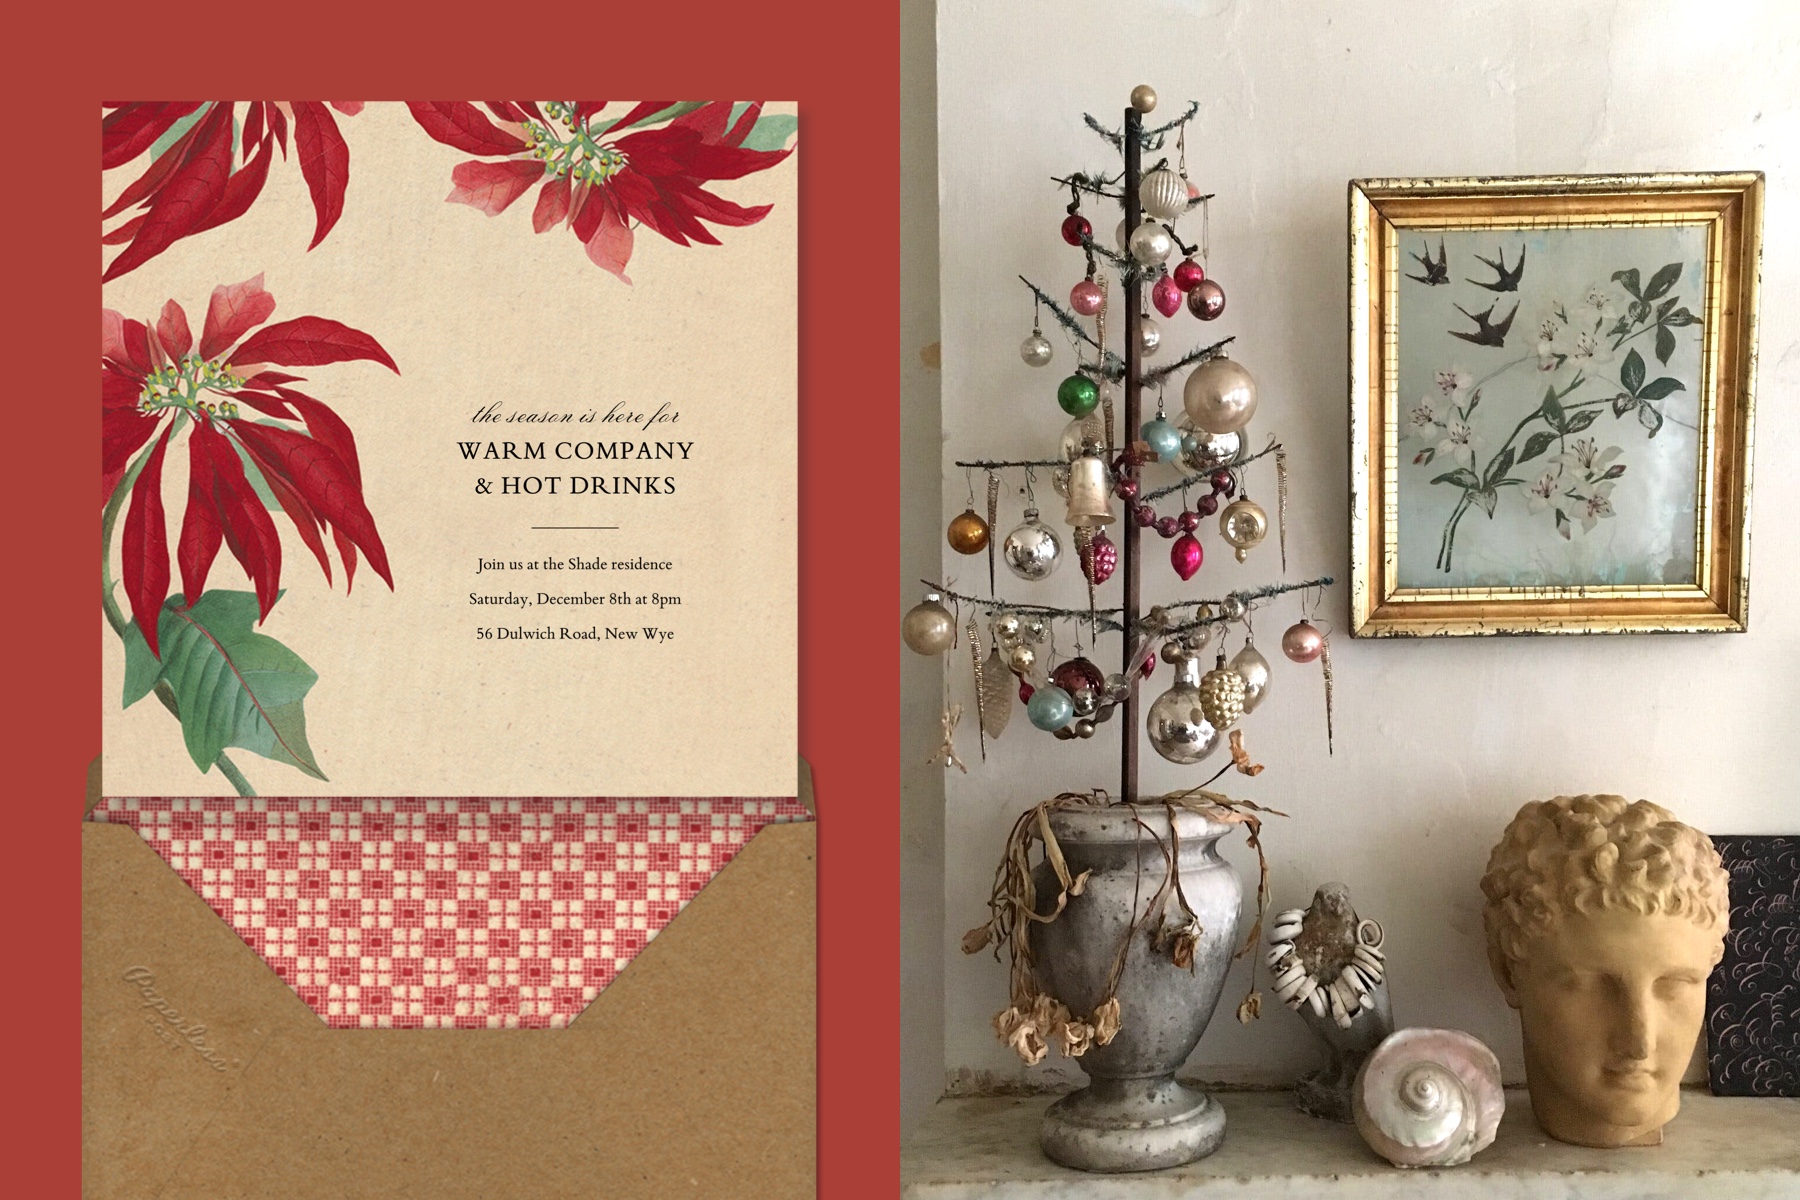 Left: A holiday invitation featuring poinsettias. Right: A feather tree with ornaments and a bust.